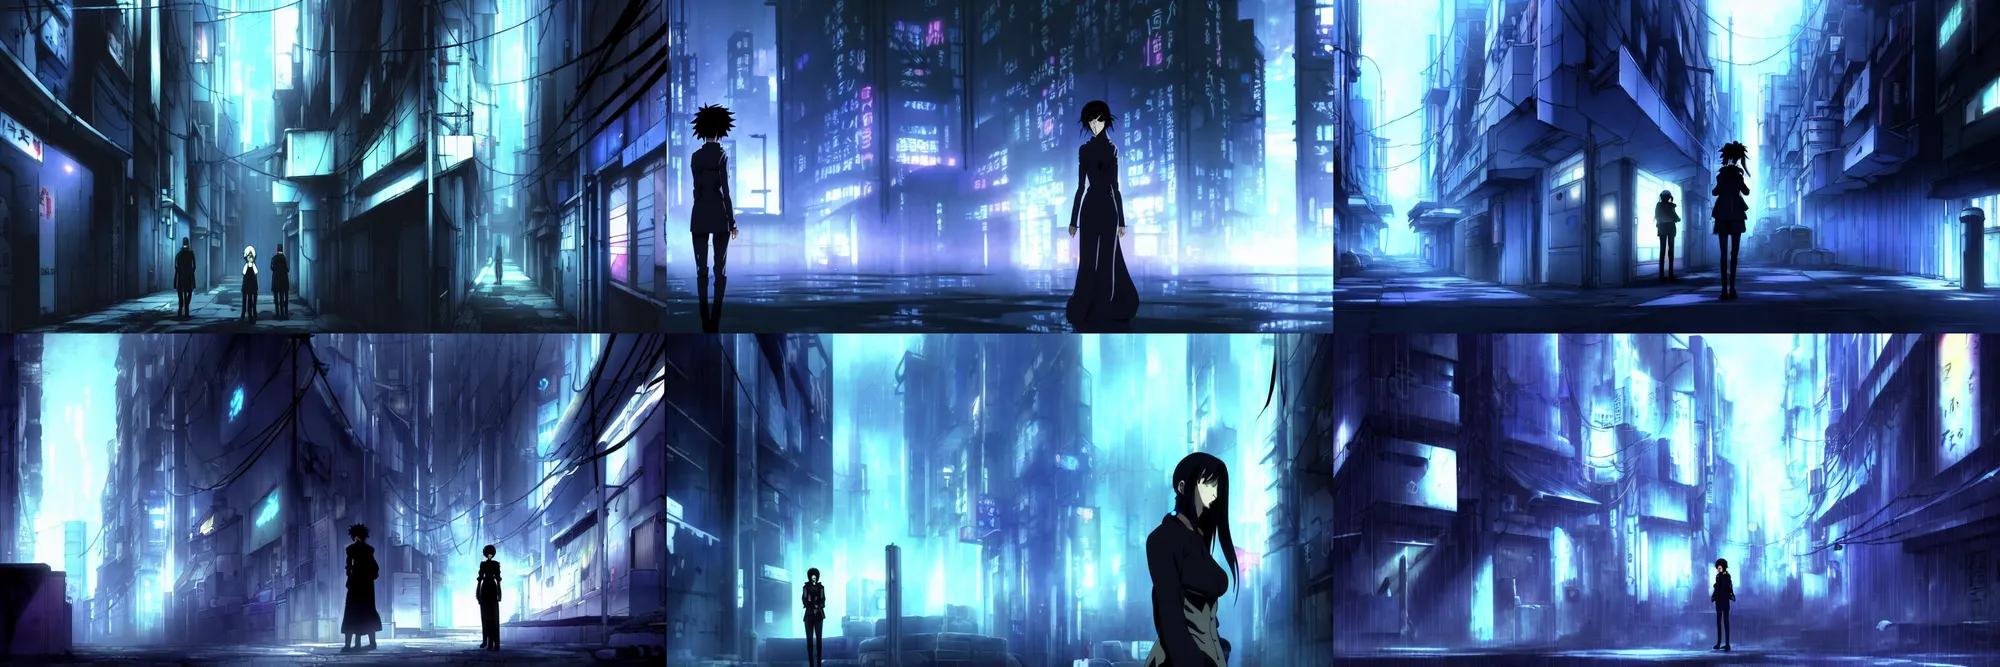 Prompt: in the anime series ergo proxy is a police crime scene investigation in a city alleyway with police tape in the atmospheric cyberpunk anime film, anime background art, at night with lights, hazy and dreary